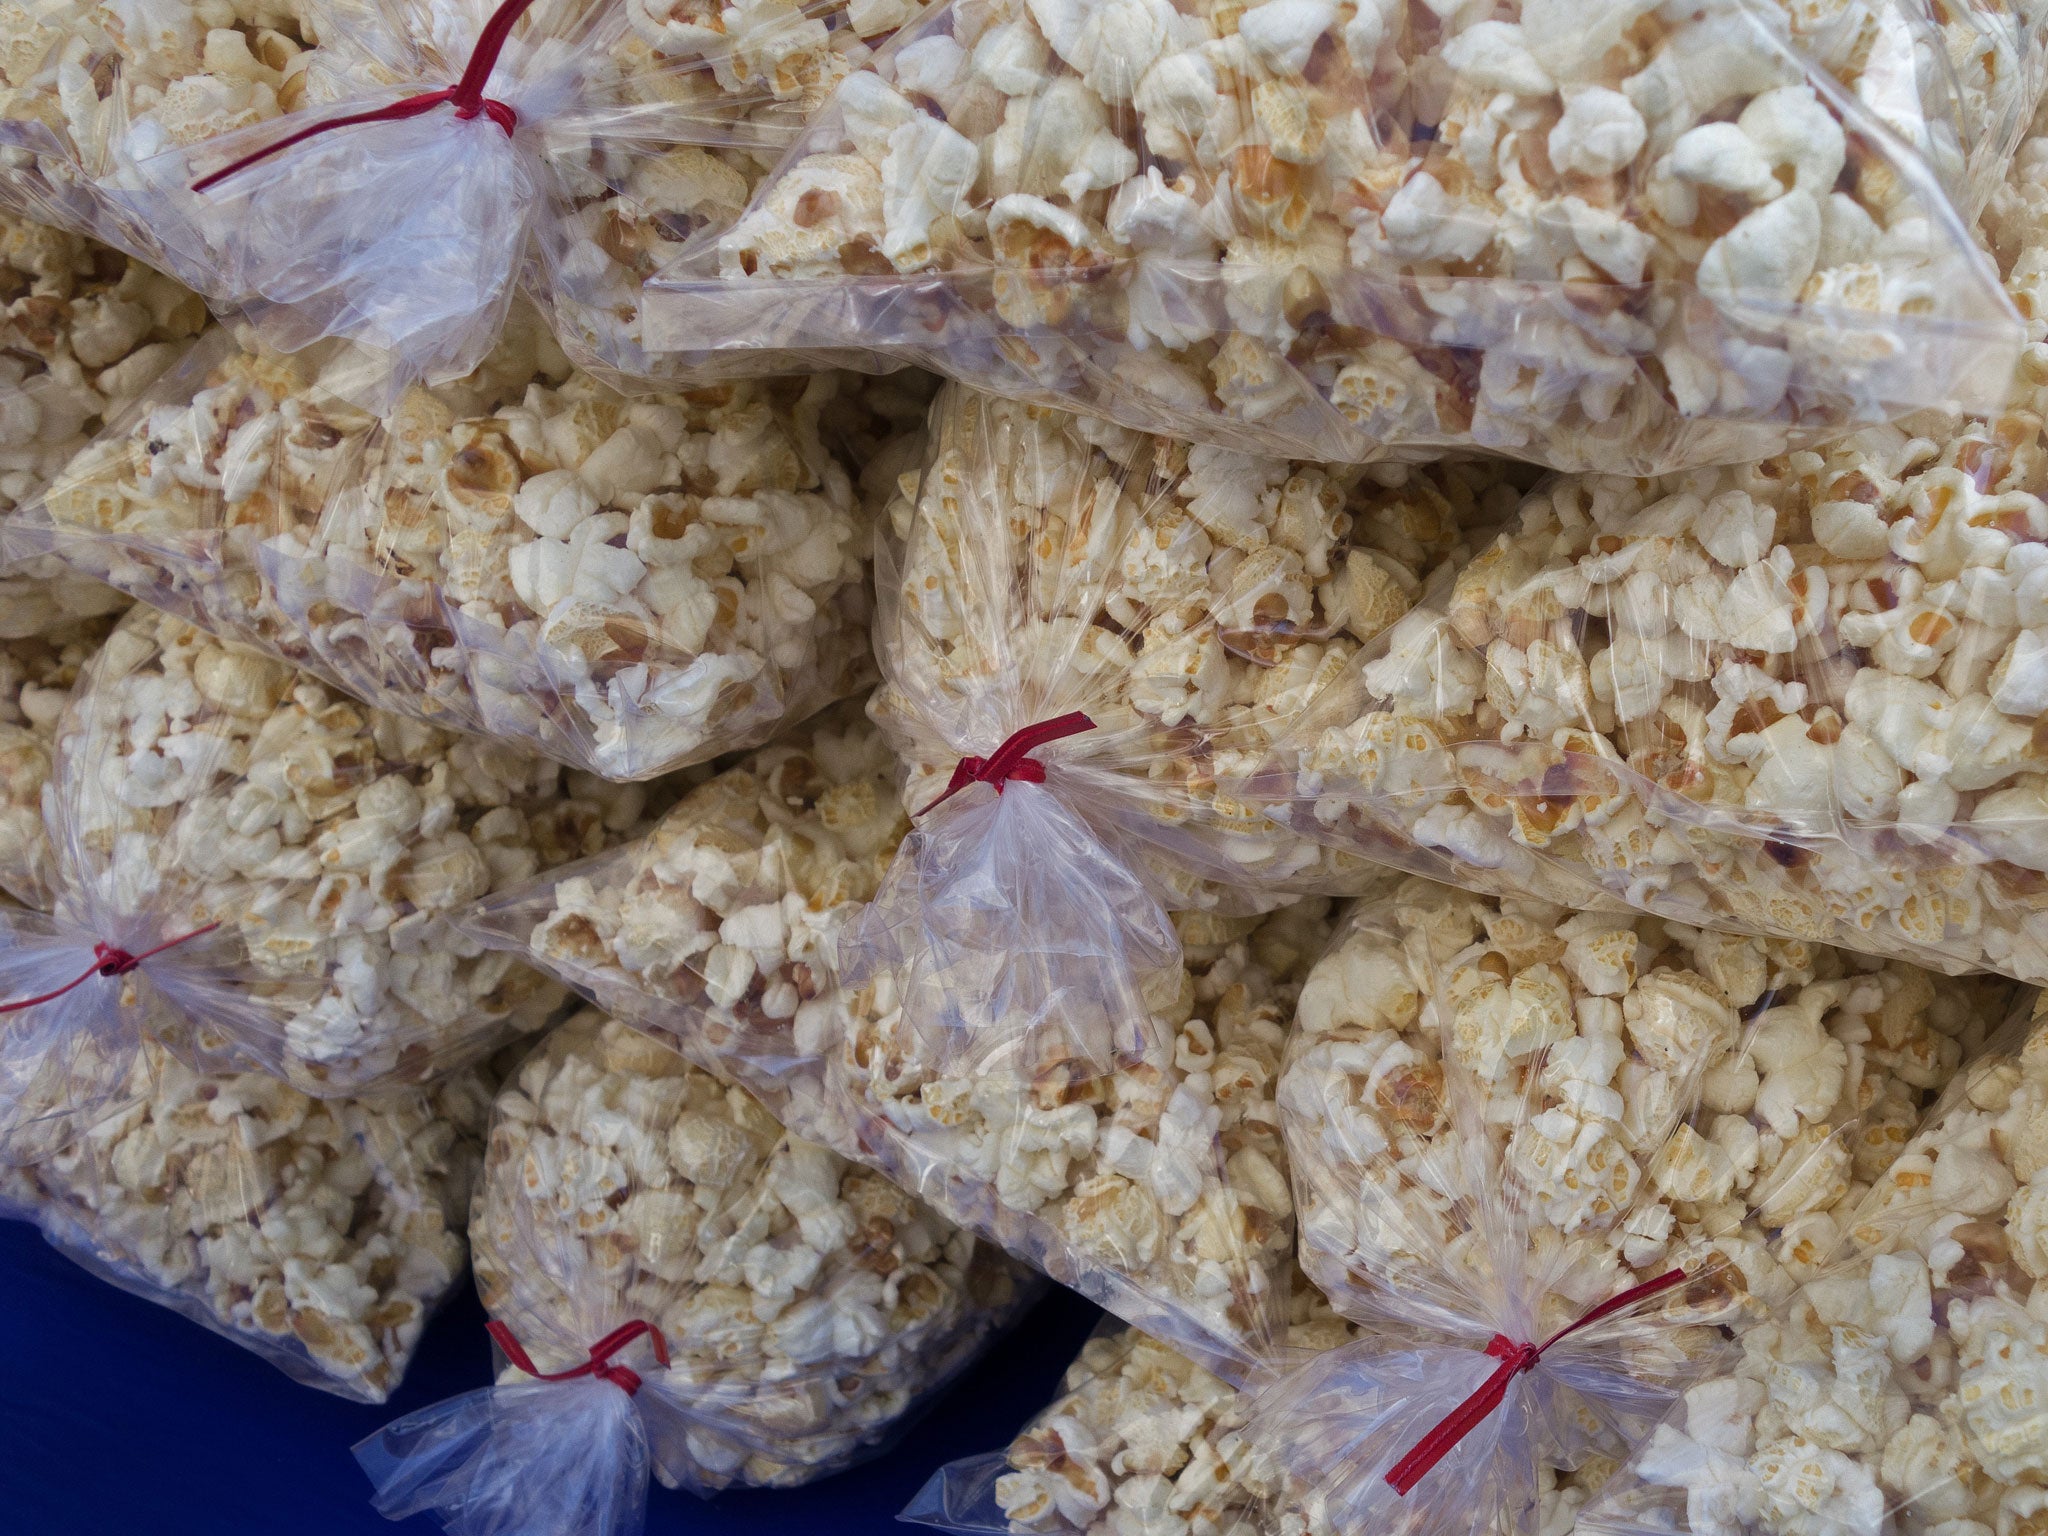 Munching on popcorn means you won't be as susceptible to adverts as other cinemagoers